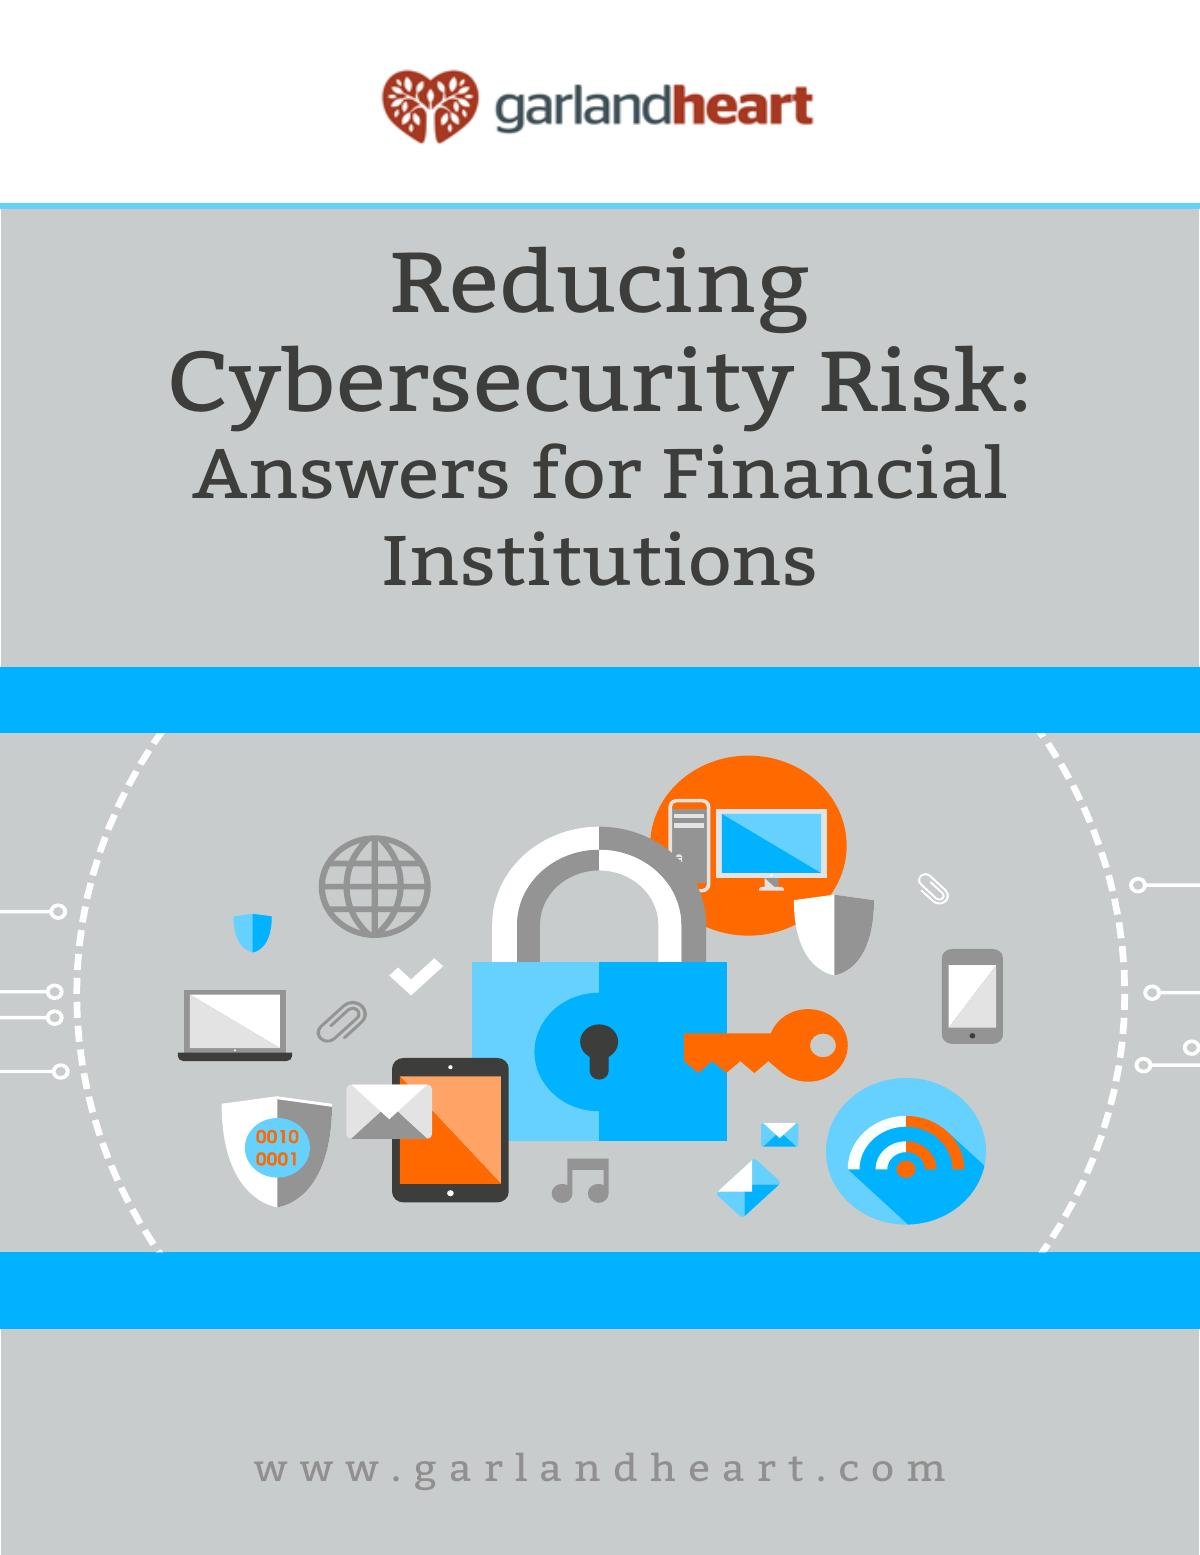 Reducing Cybersecurity Risk: Answers for Financial Institutions